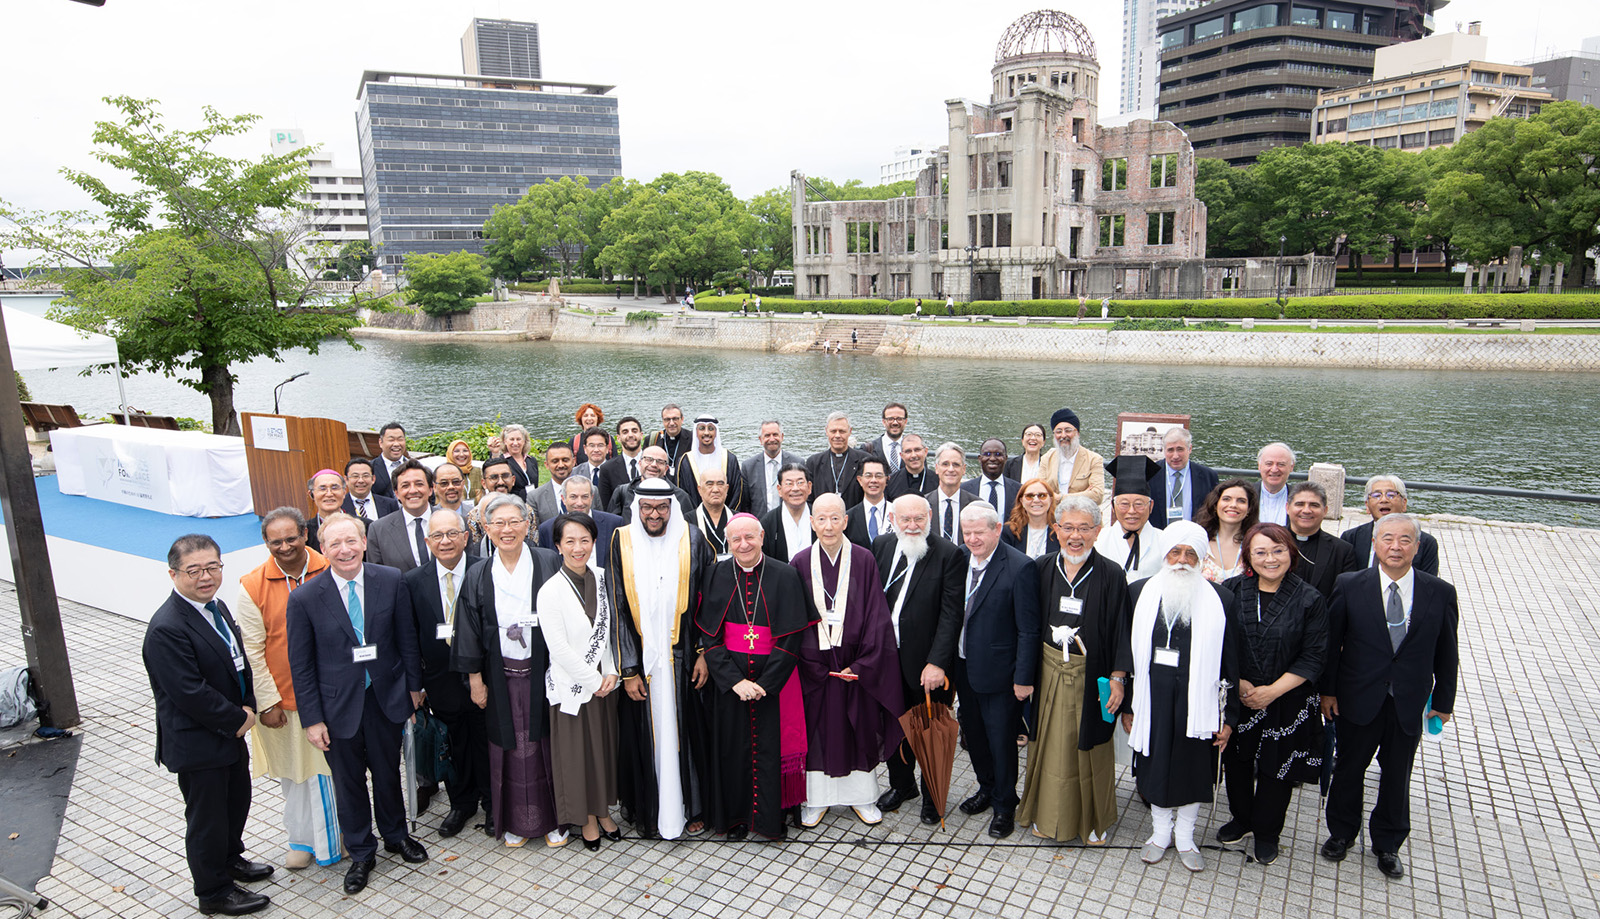 In Hiroshima, the Vatican joined religious leaders to change the narrative on AI